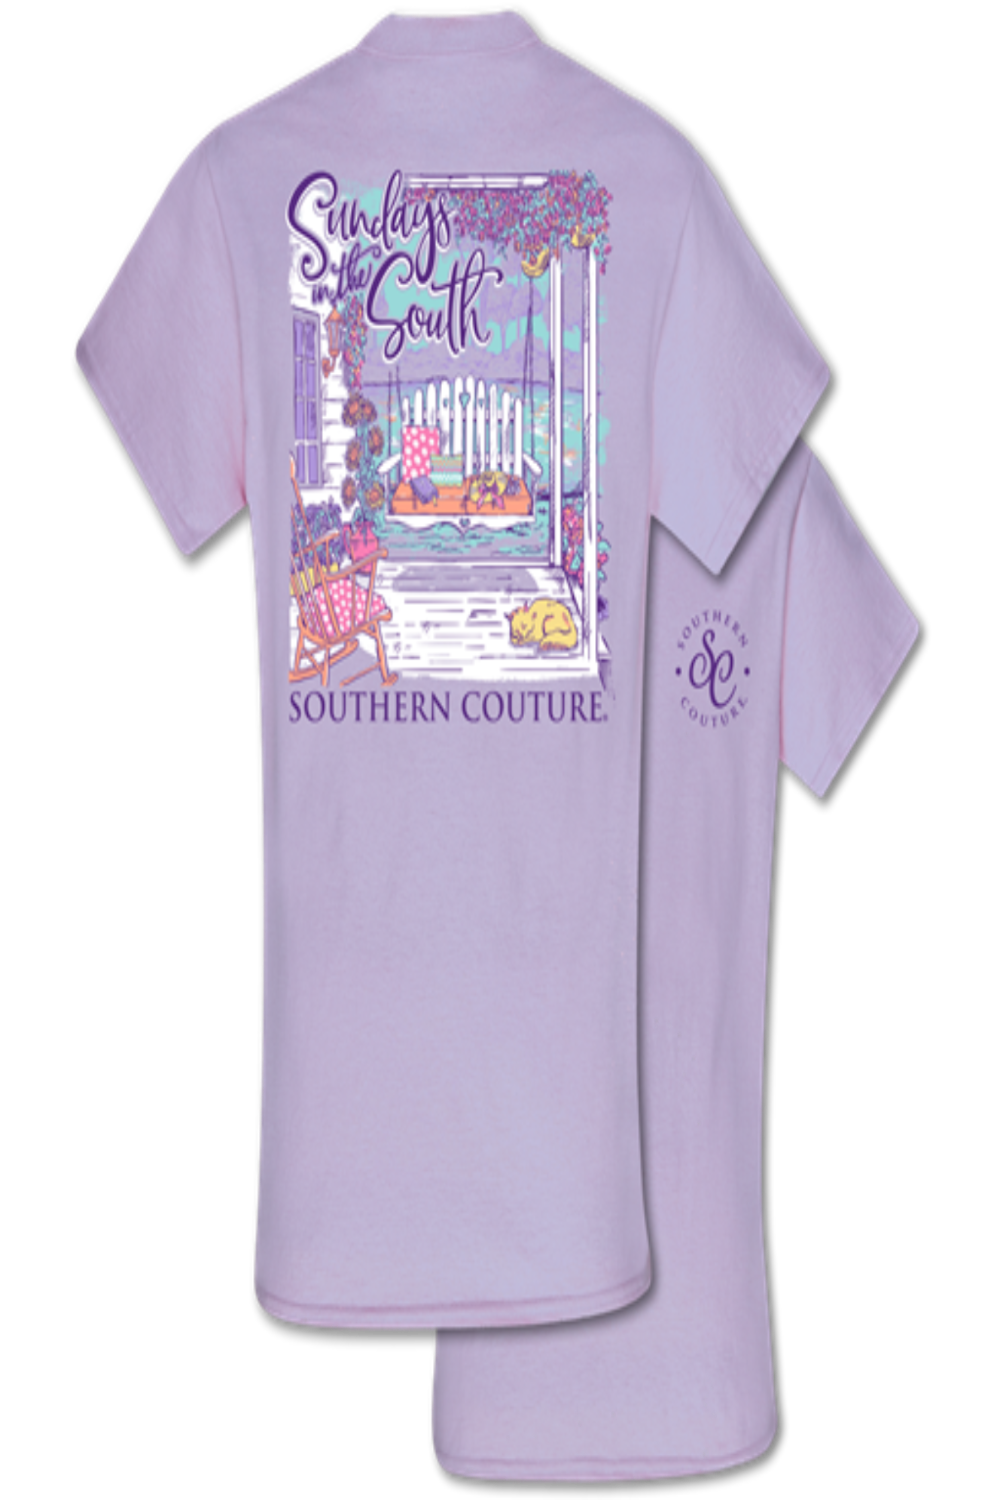 Sundays In The South Porch- Short Sleeve T-Shirt by Southern Couture